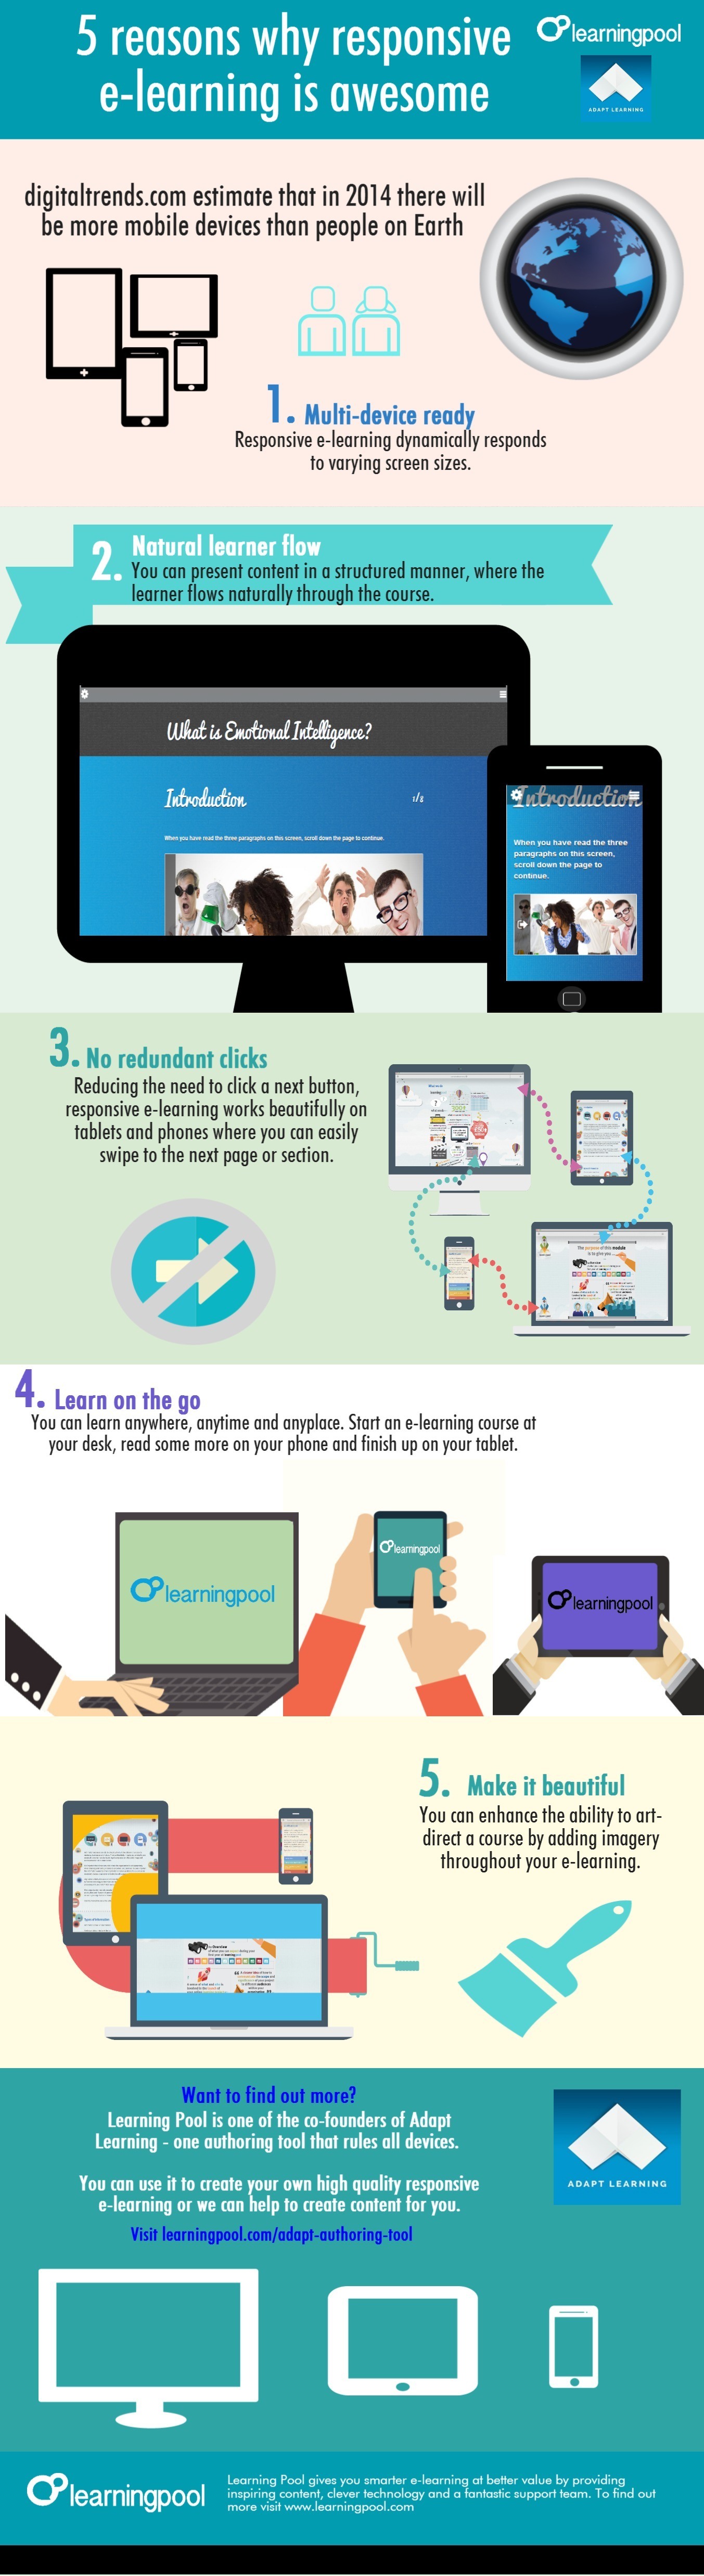 5 Reasons why Responsive E-learning is Awesome Infographic